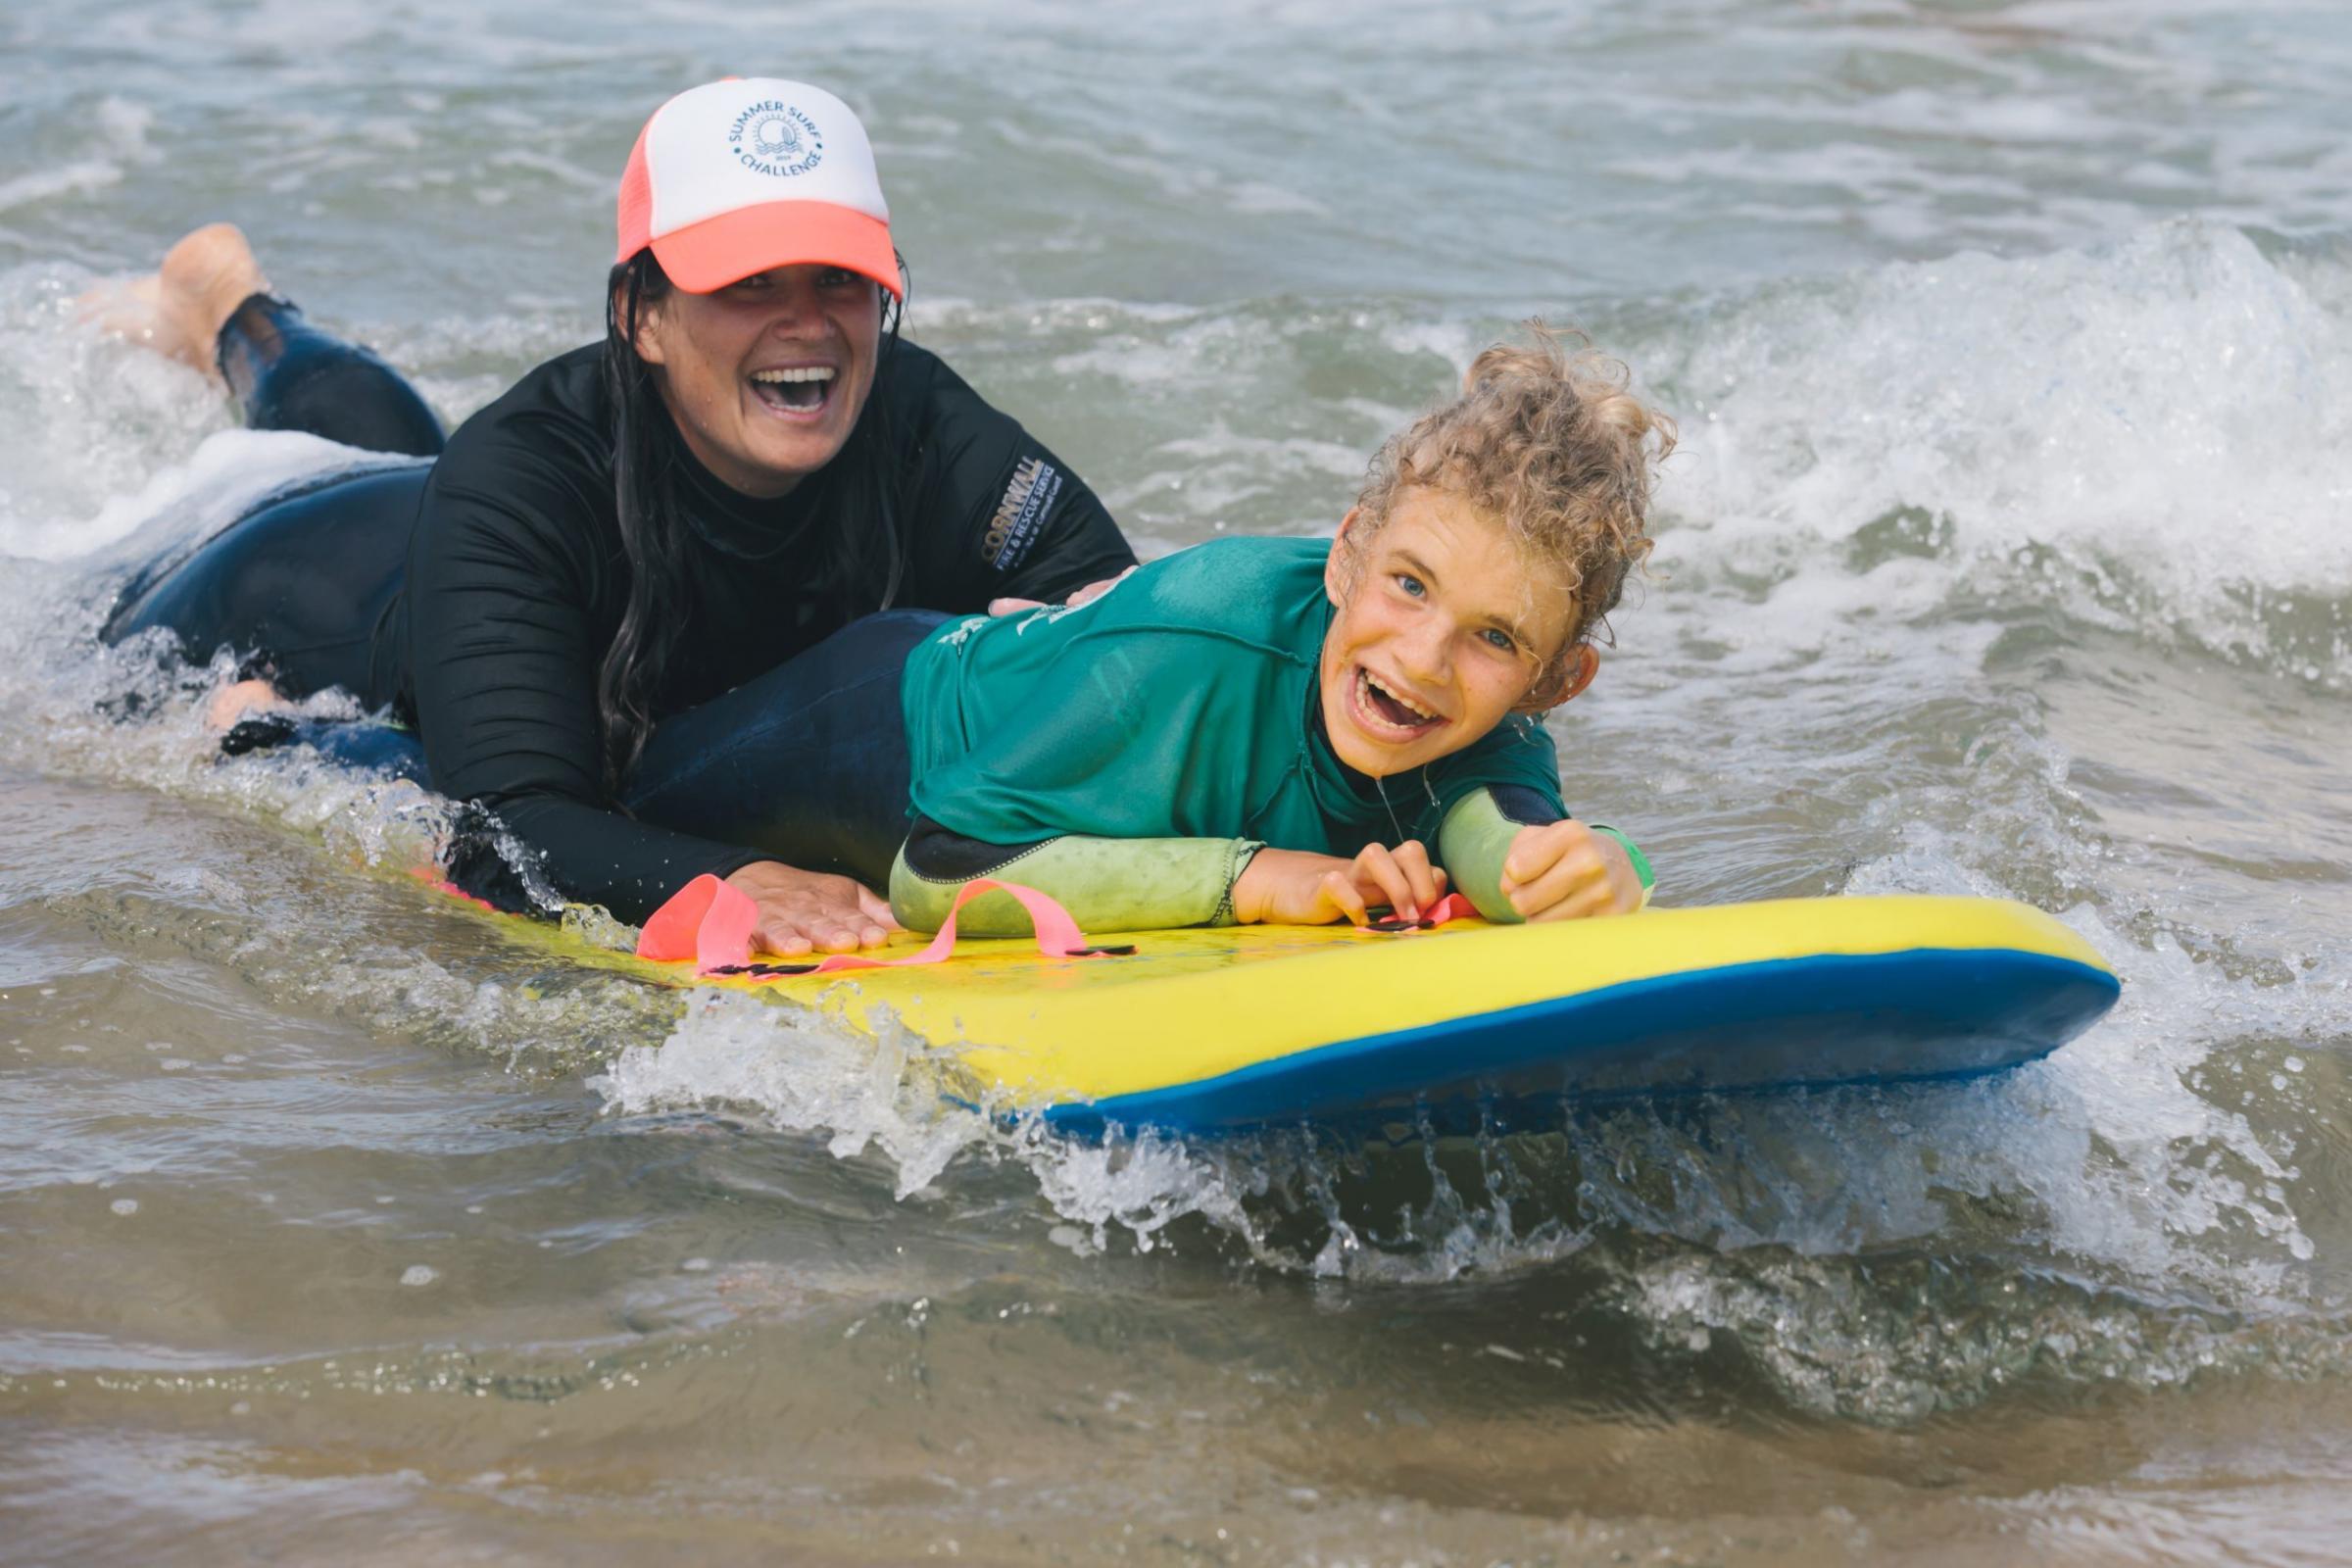 The charity supports mental health through surfing. Picture: Checkered Photography